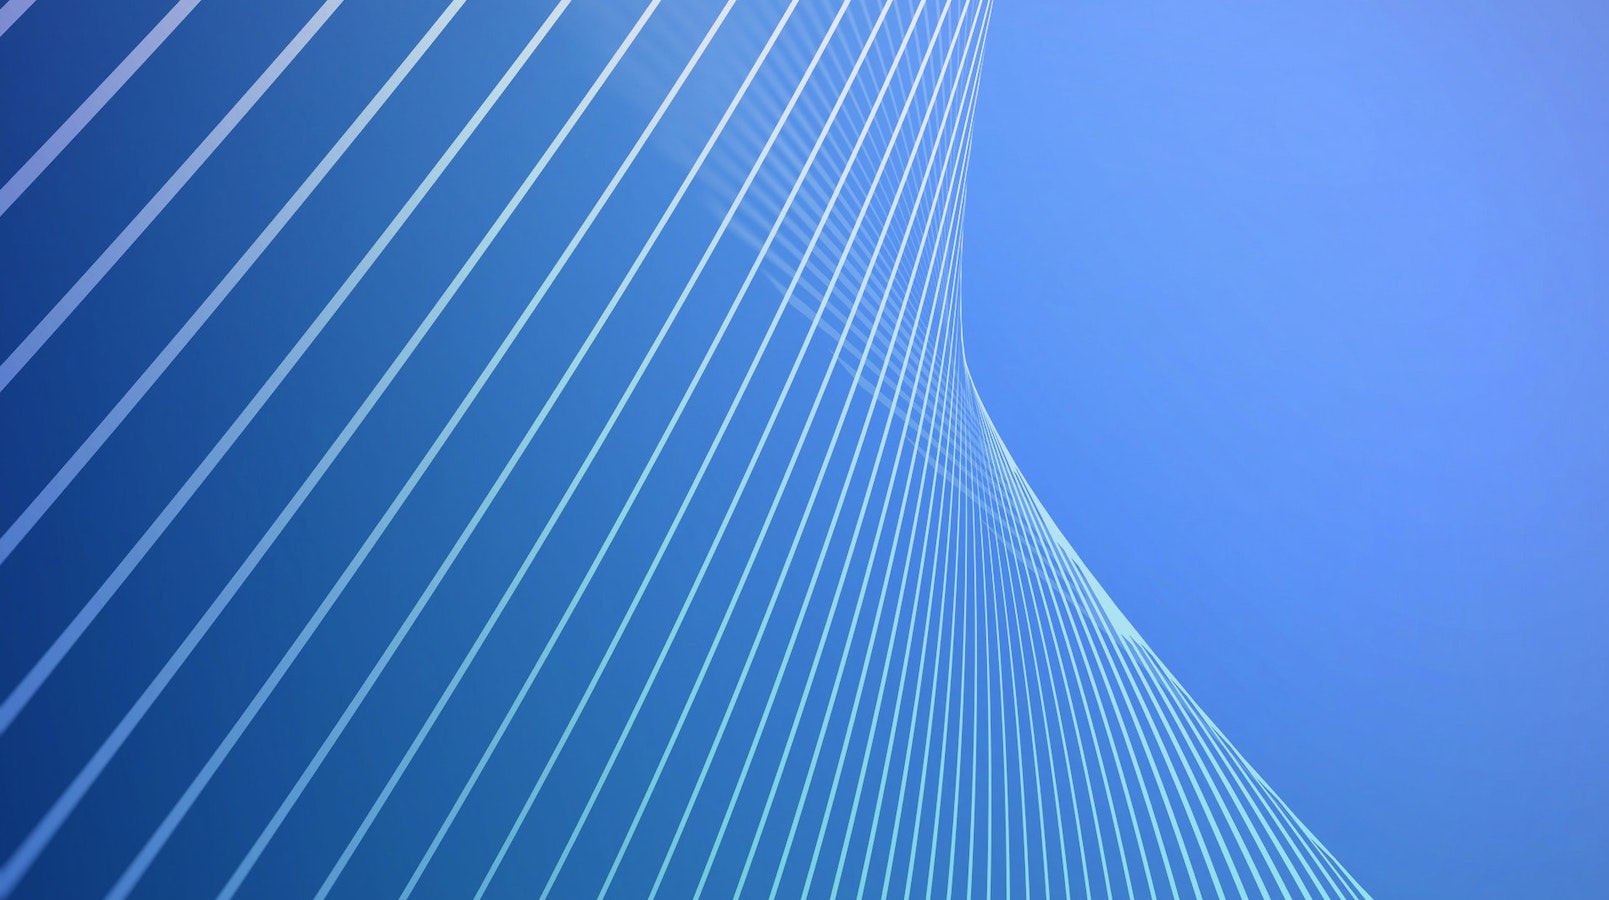 Light green diagonal lines on a blue background